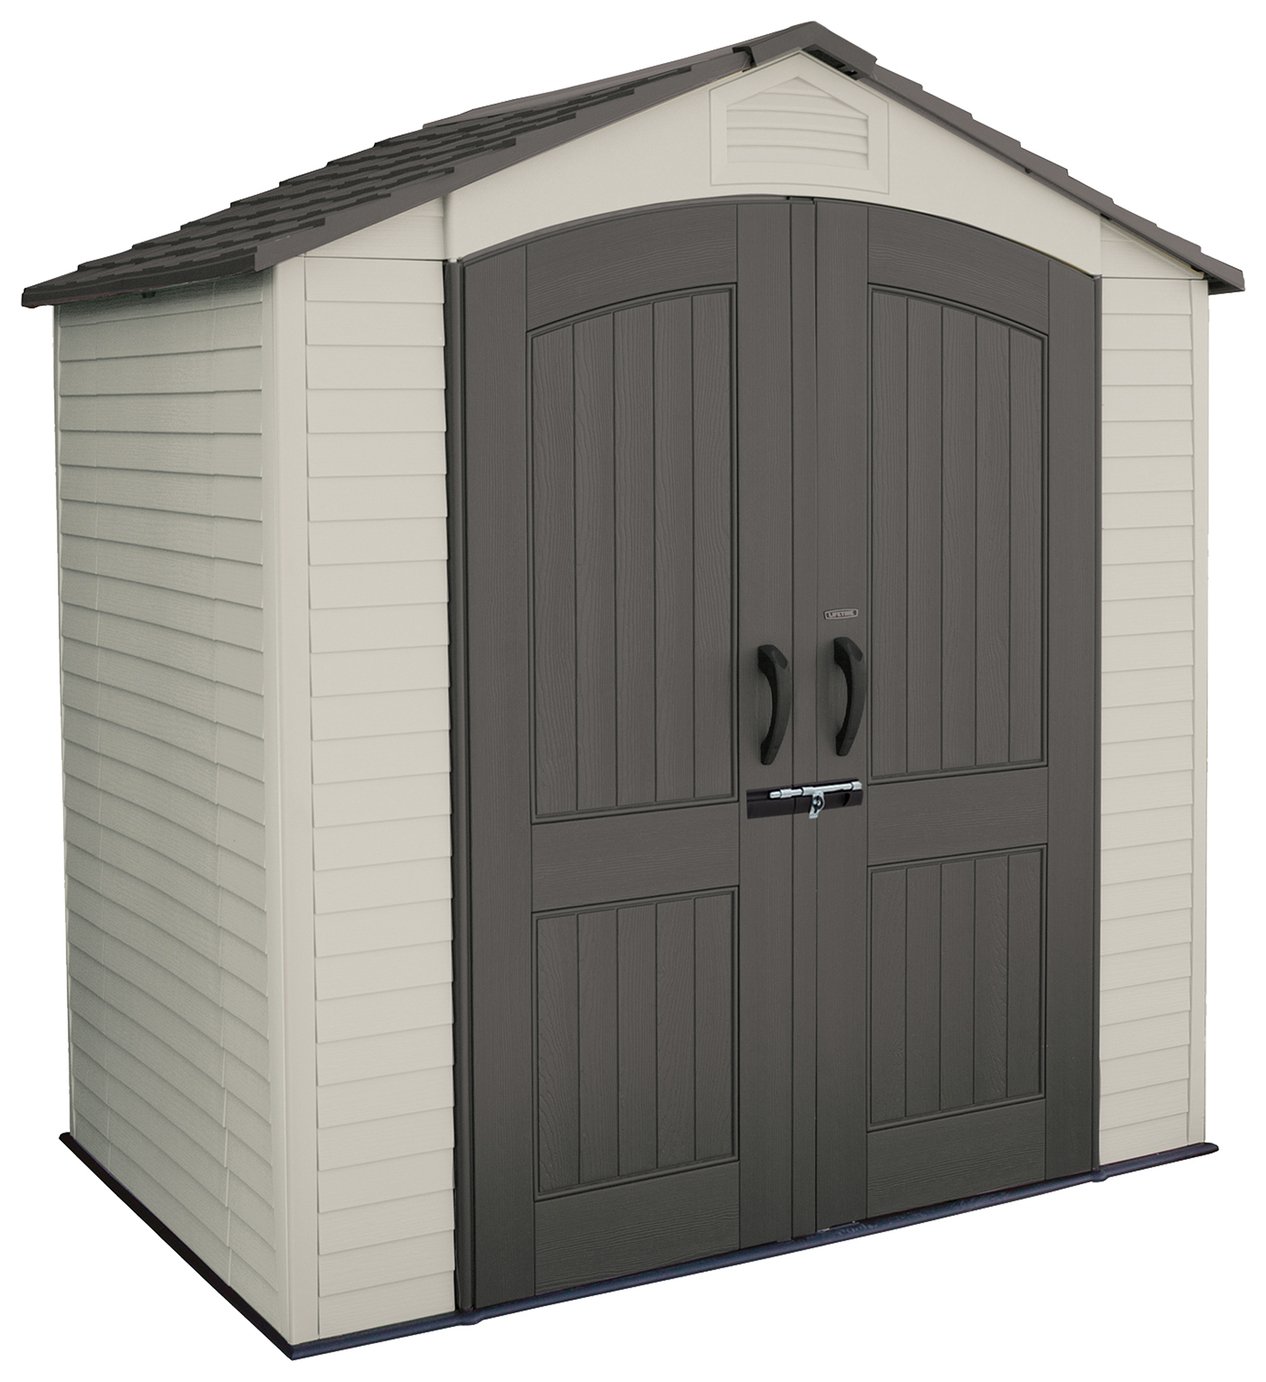 Lifetime 7 x 4.5ft Plastic Outdoor Storage Shed